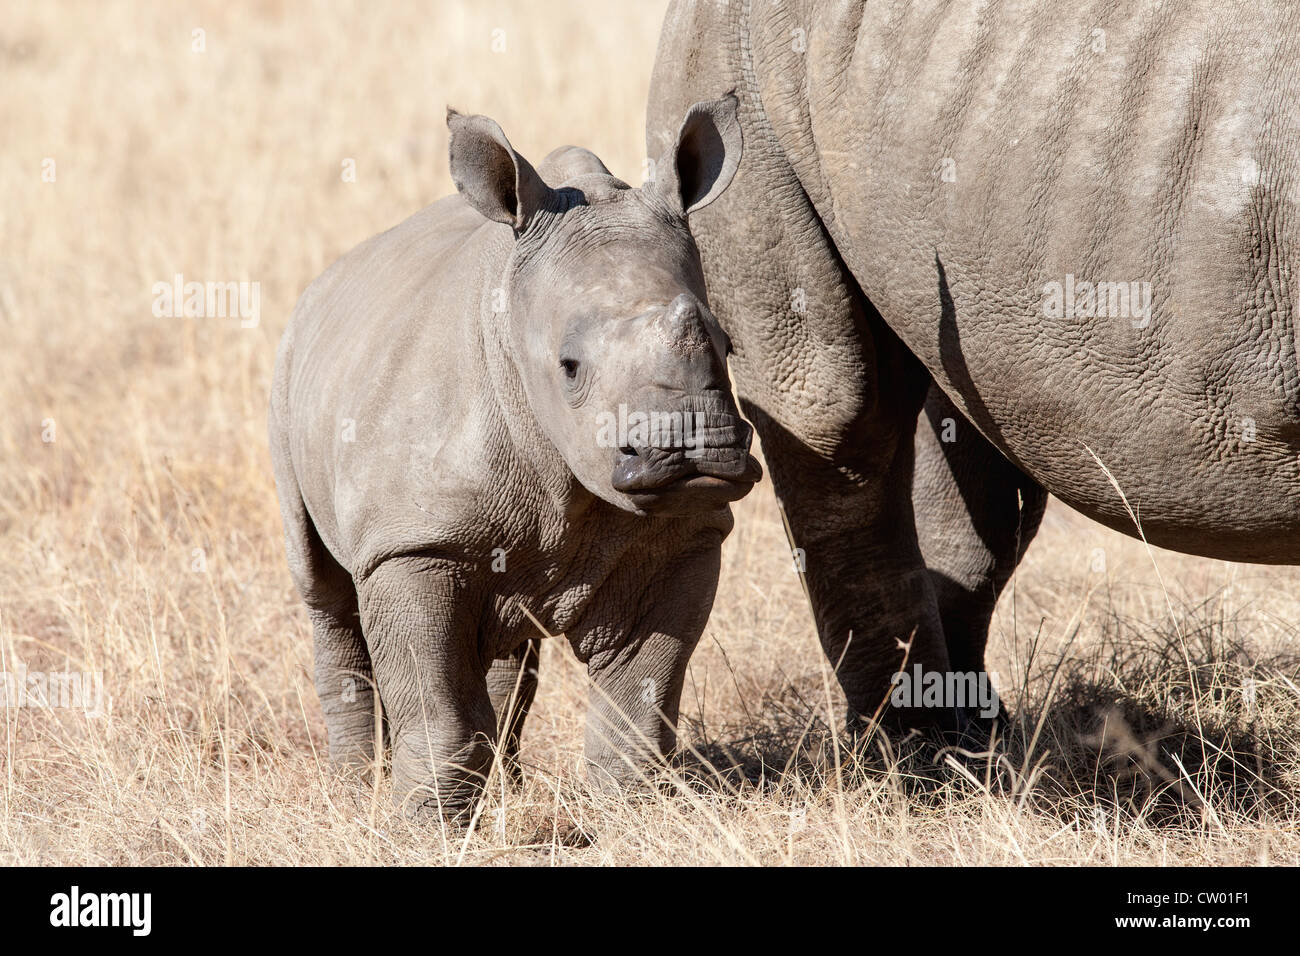 White rhino calf (Ceratotherium simum), Elandslaagte game ranch, North Western province, South Africa Stock Photo